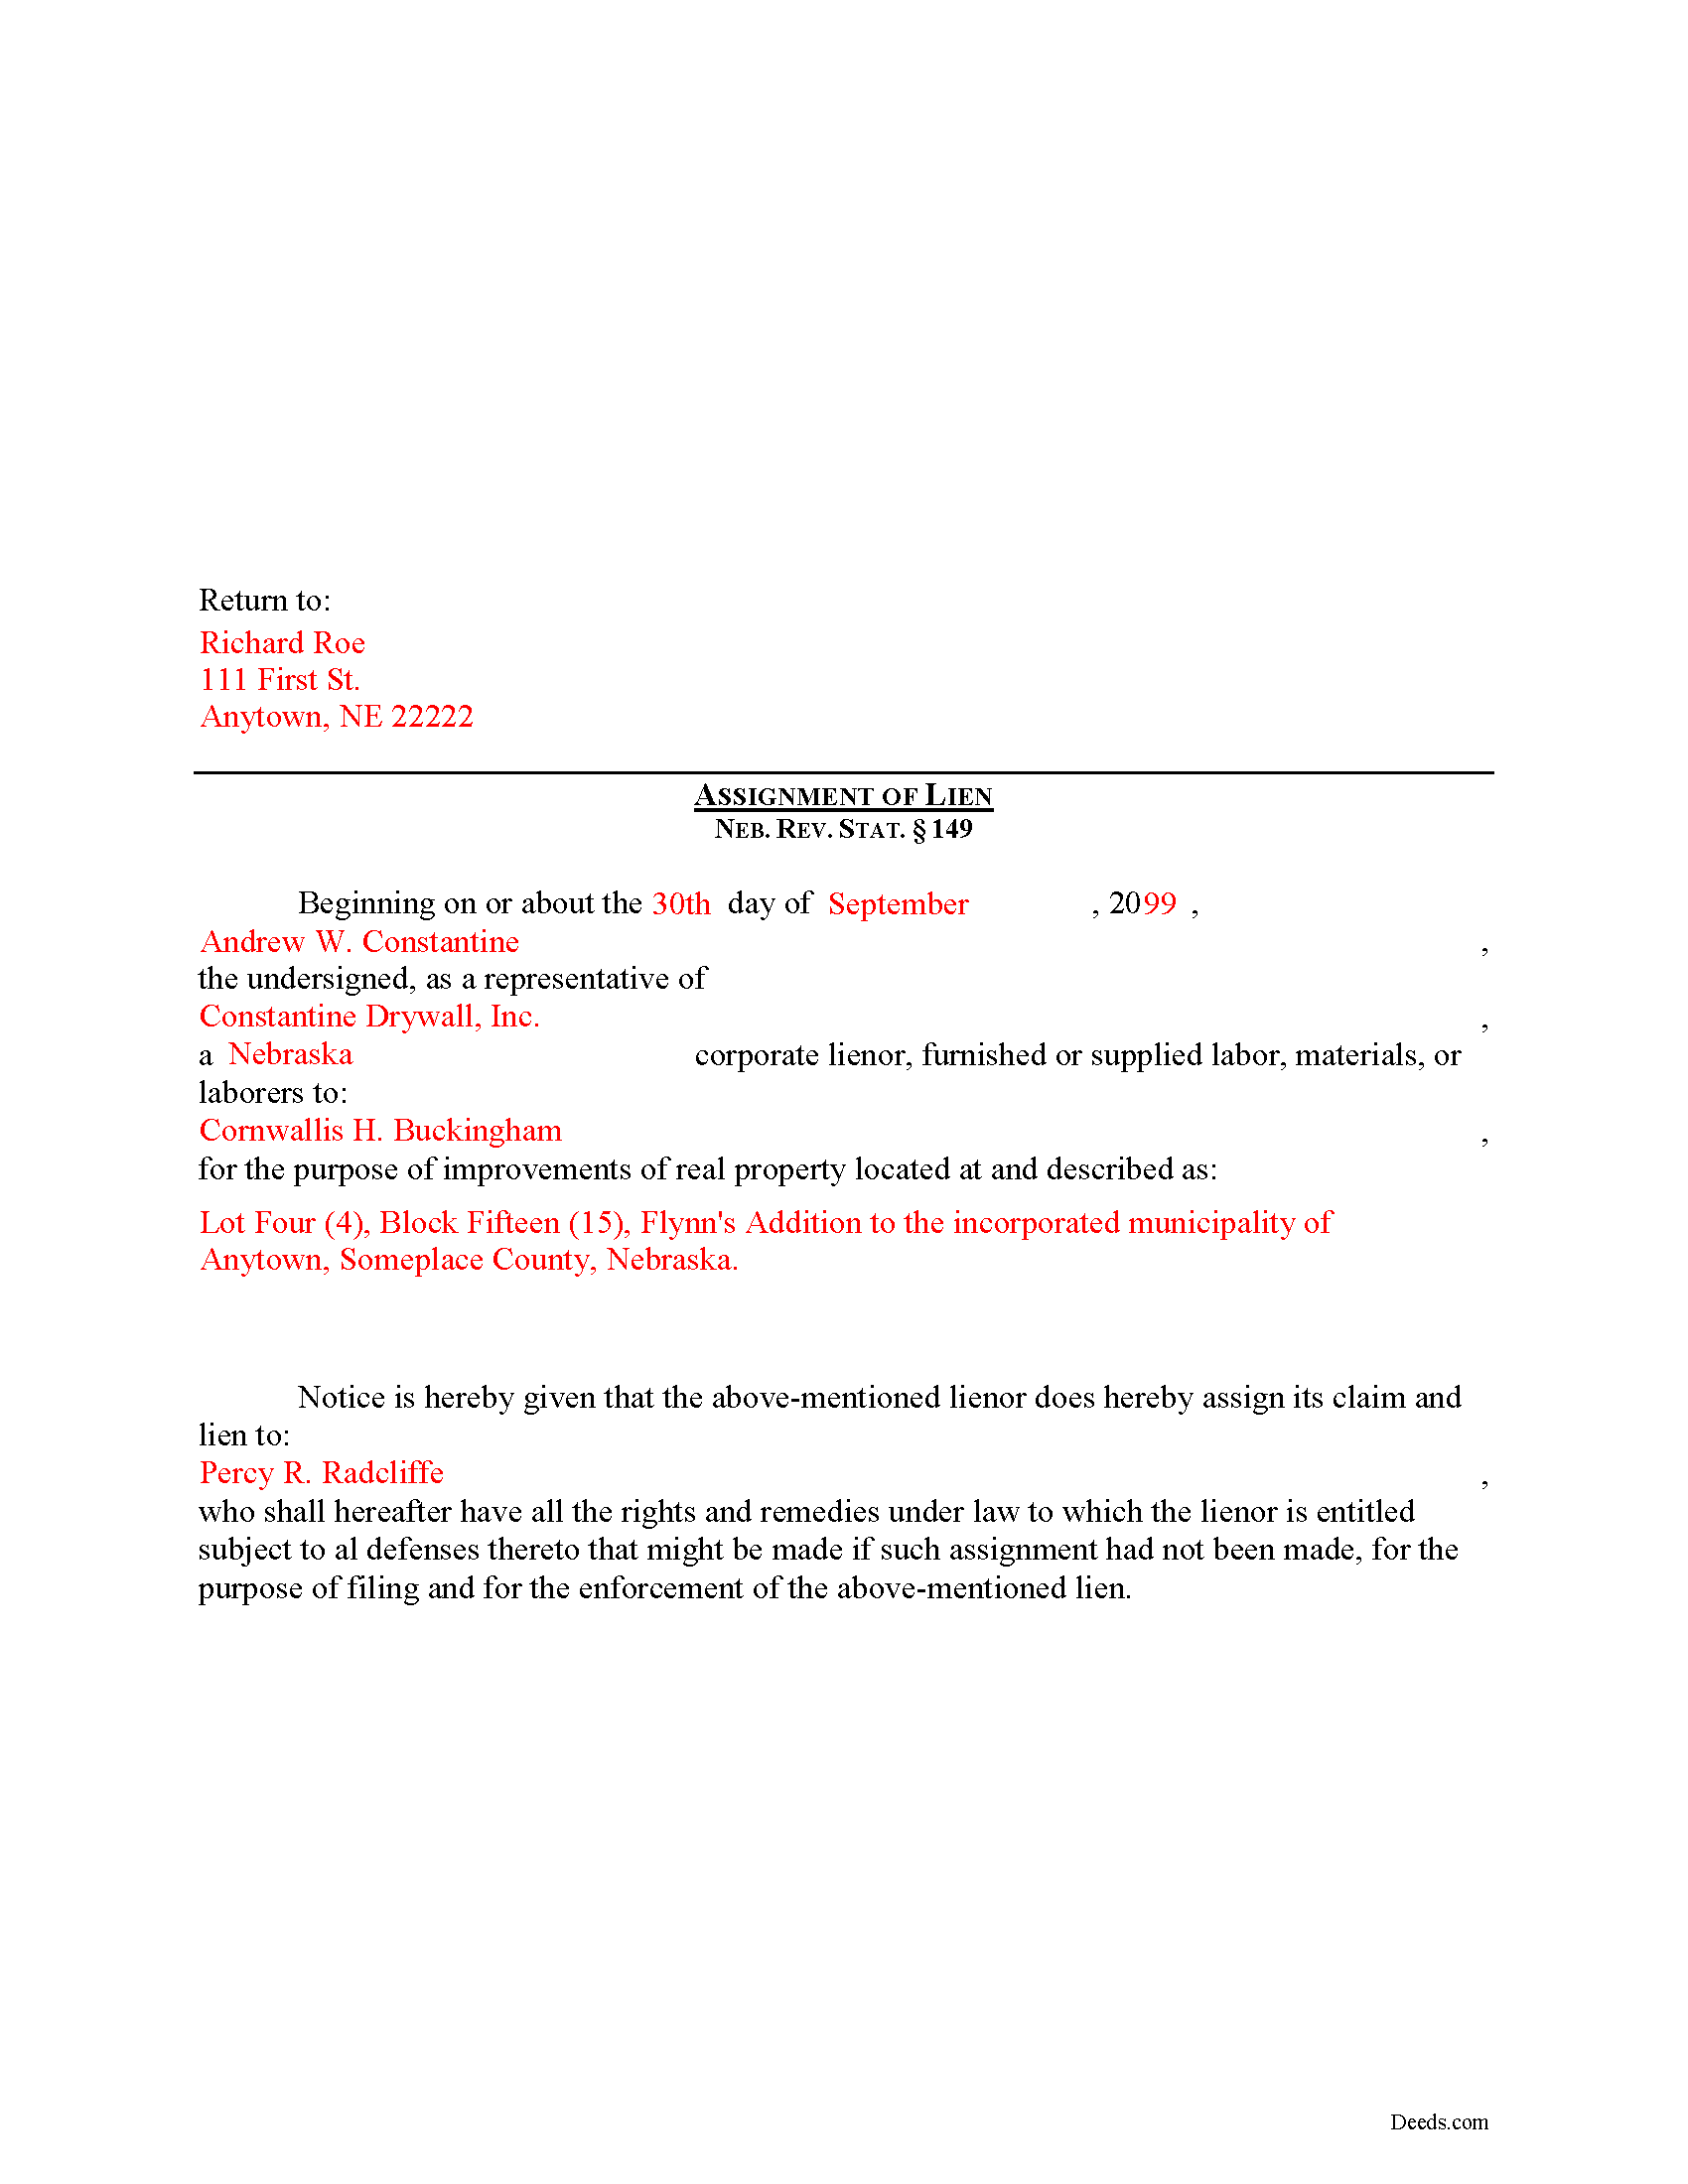 Completed Example of the Construction Lien Assignment Document